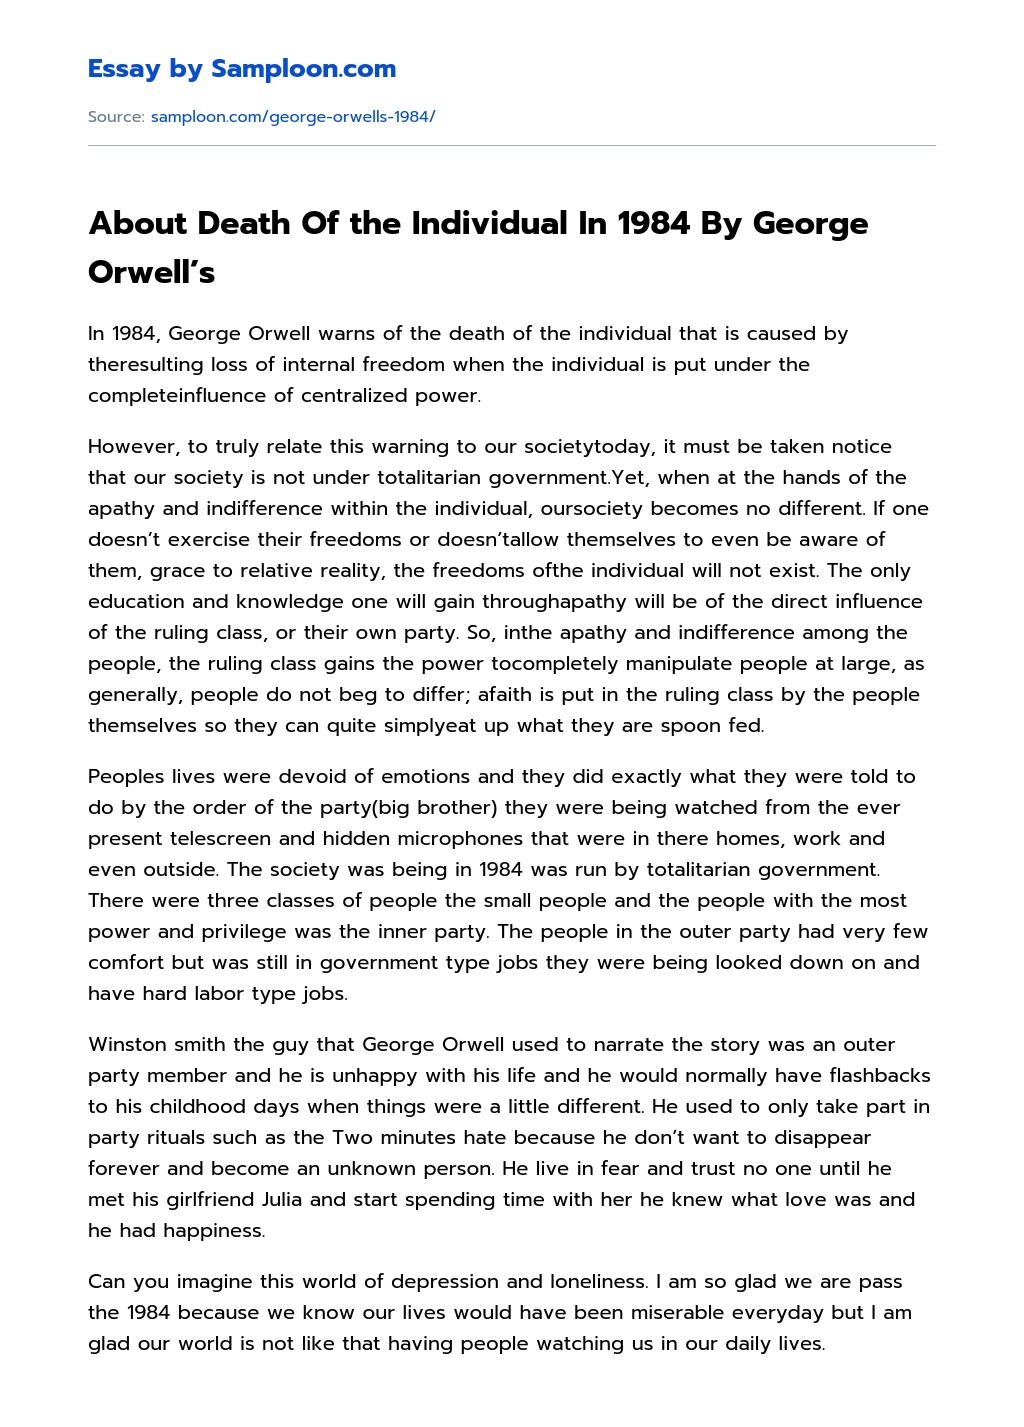 About Death Of the Individual In 1984 By George Orwell’s essay